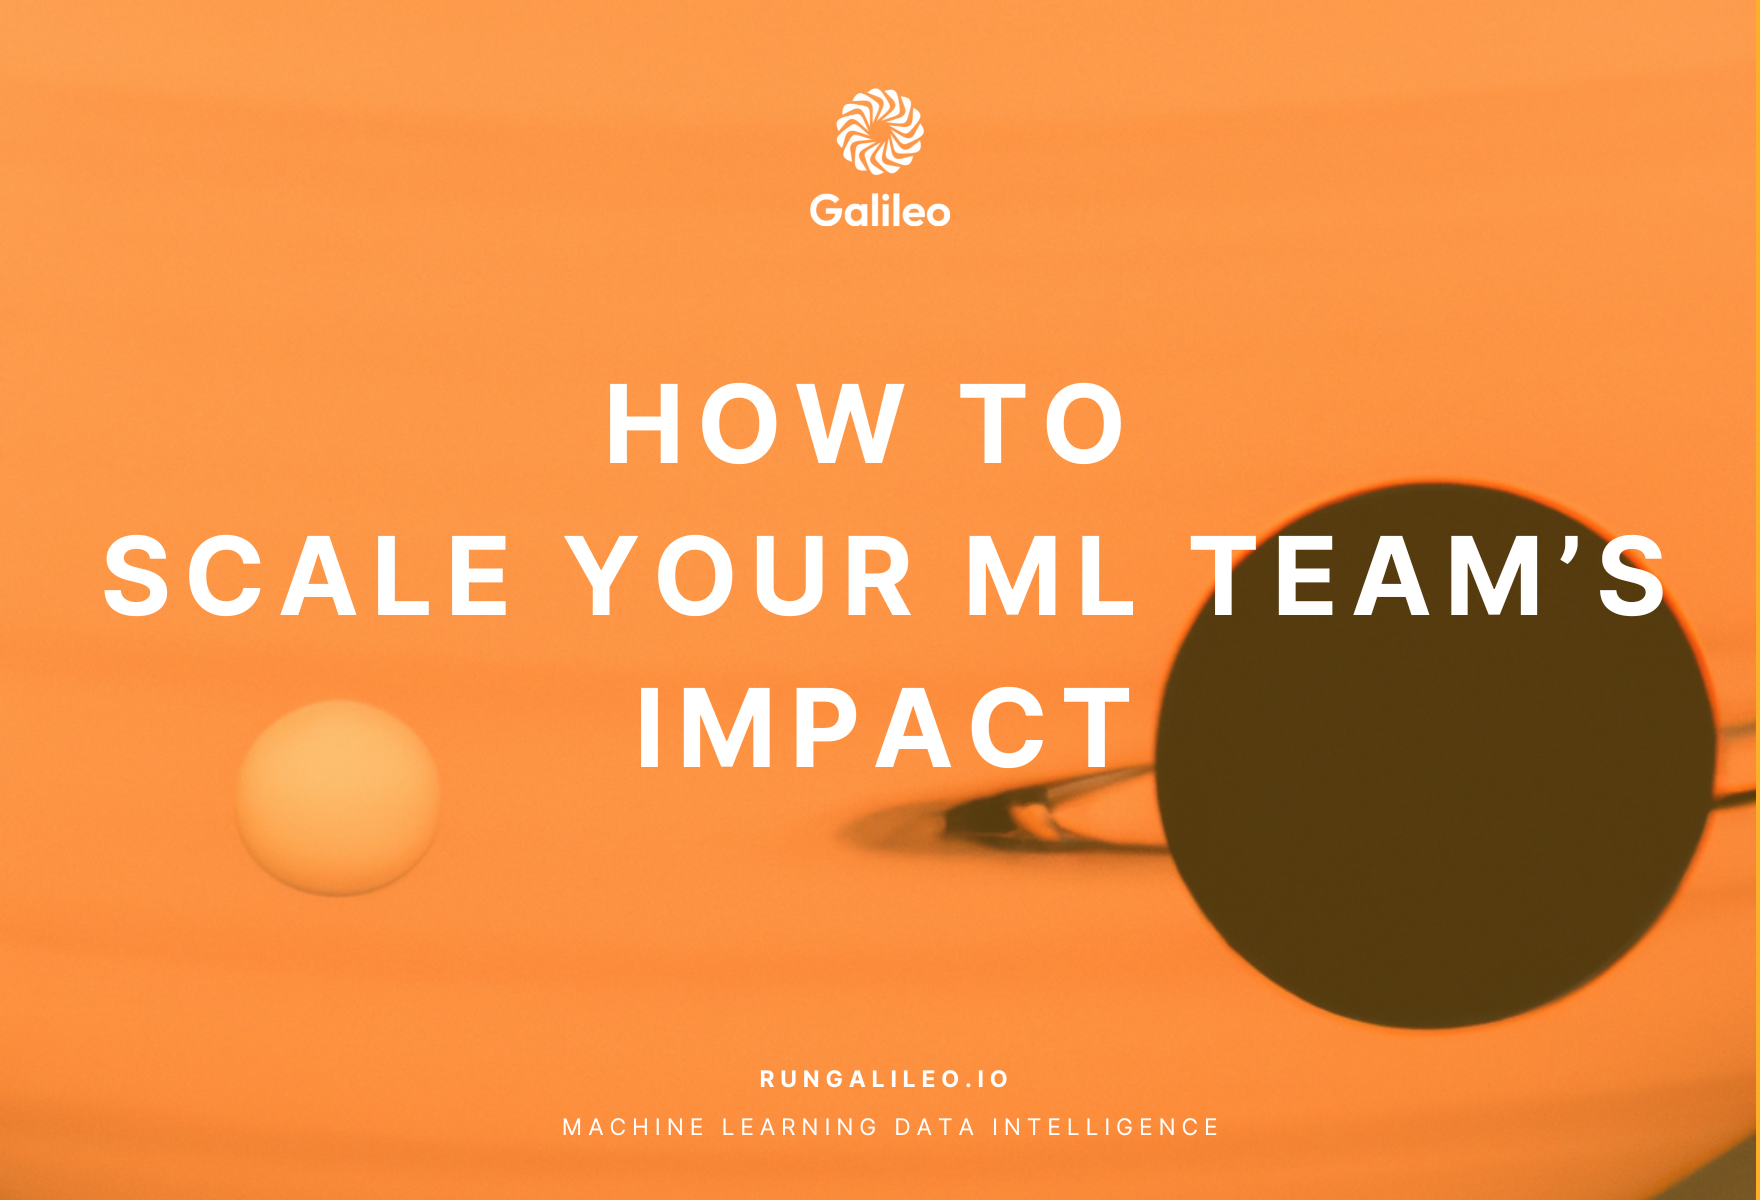 Putting a high-quality Machine Learning (ML) model into production can take weeks, months, or even quarters. Learn how ML teams are now working to solve these bottlenecks.